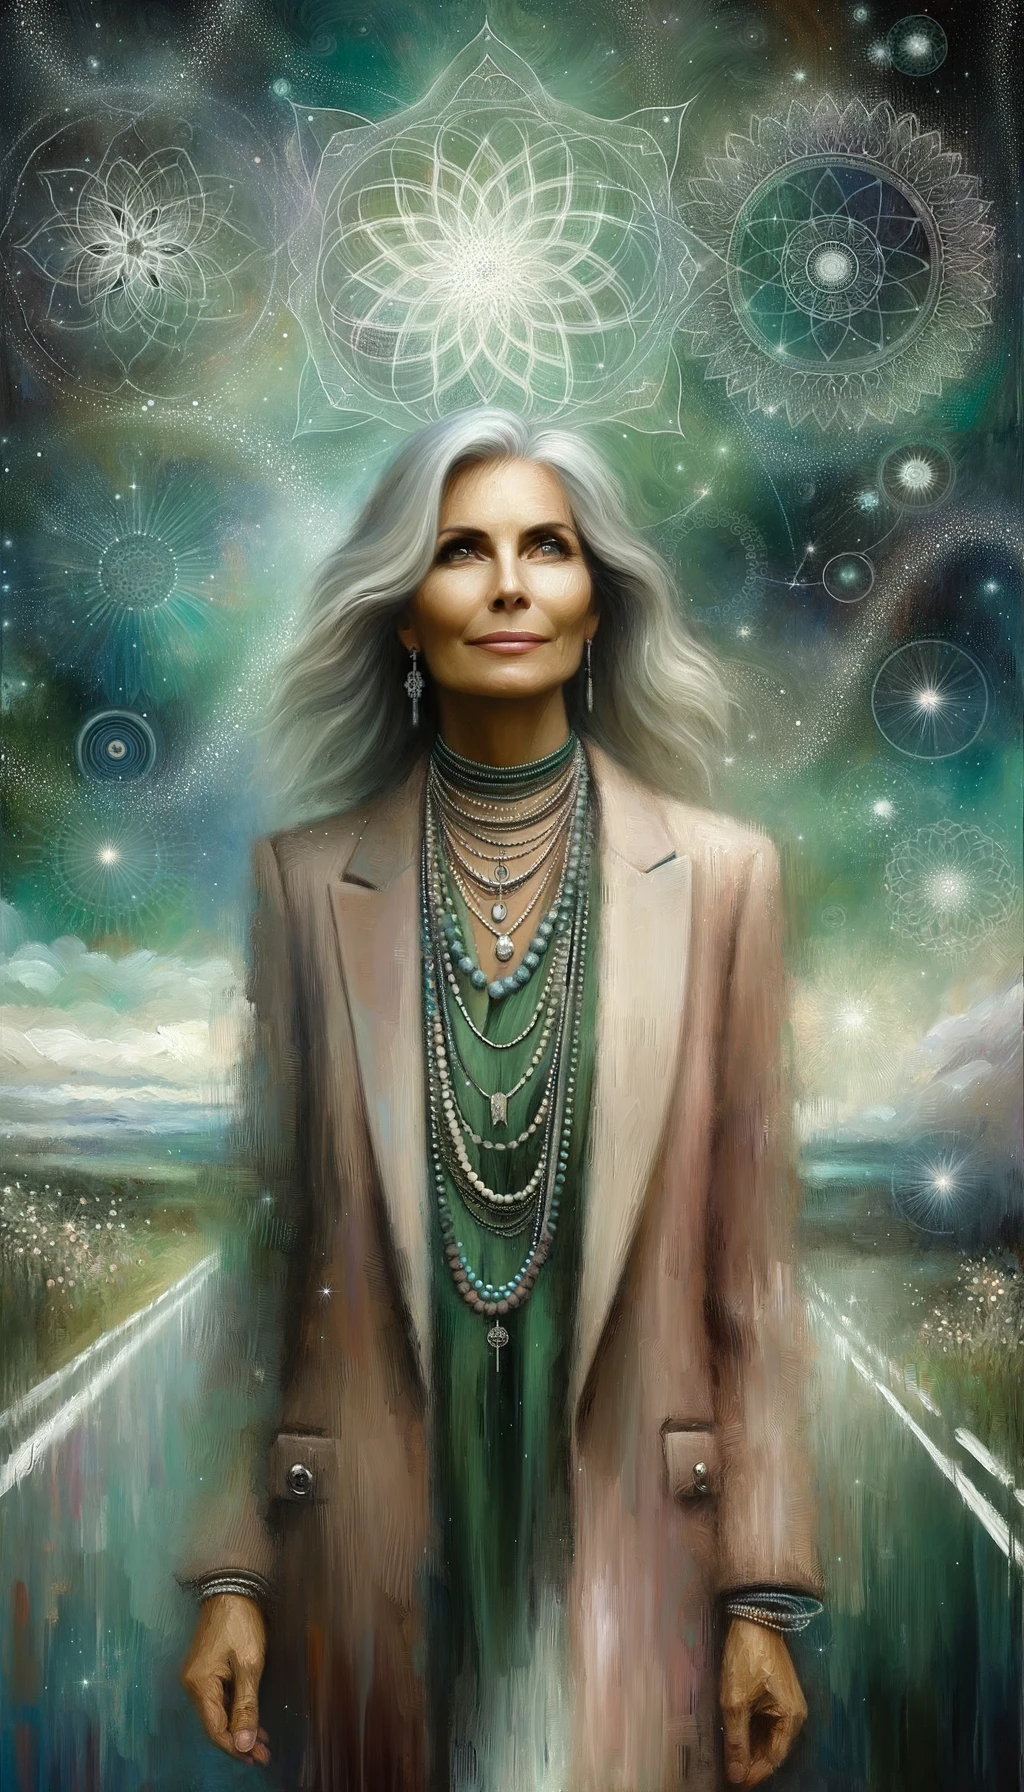 Wendy Kier, AI Art, Sales Made Easy, businesswoman in her early 50s. Adorned with boho-inspired jewelry and standing on a road leading in one direction, the scene captures her contemplative mood against a deep green spiritual backdrop